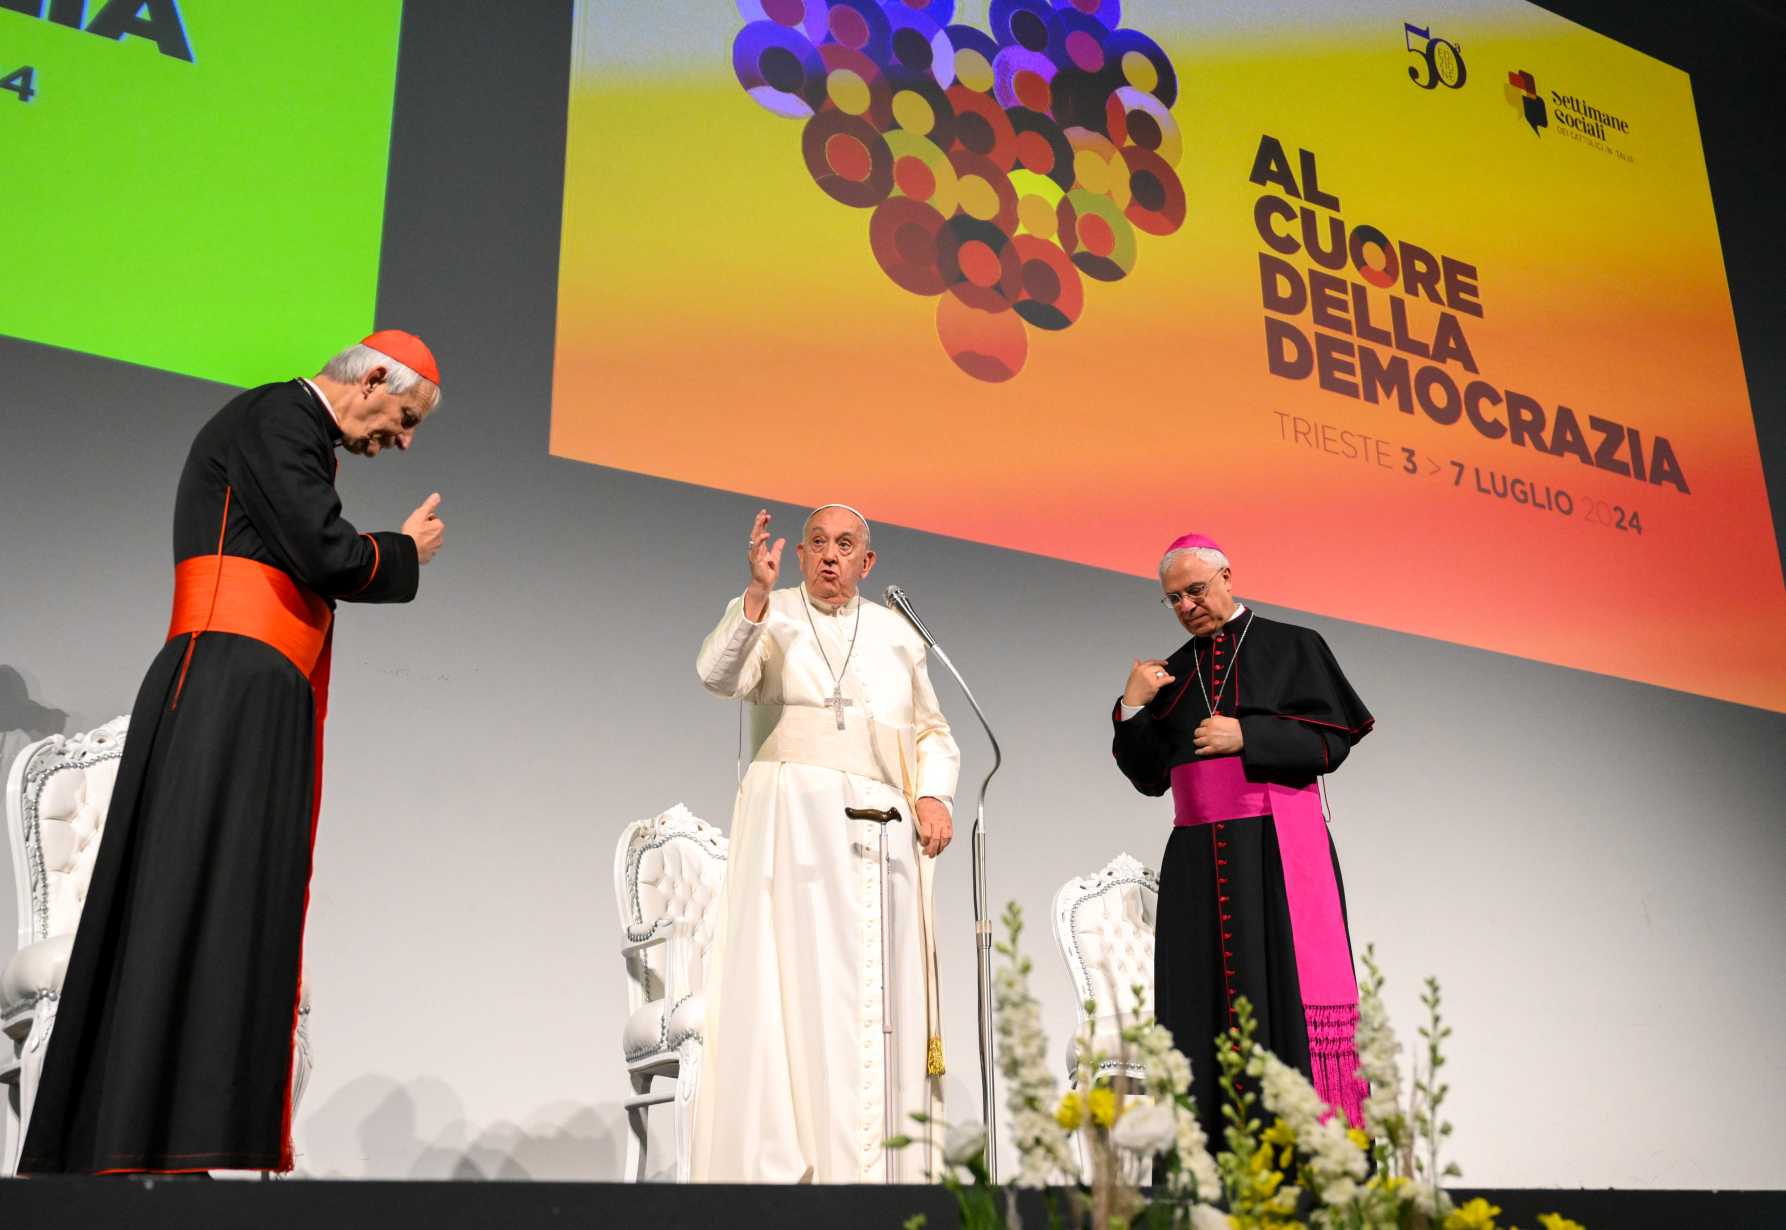 Faith in democracy: Participation in government long a papal priority